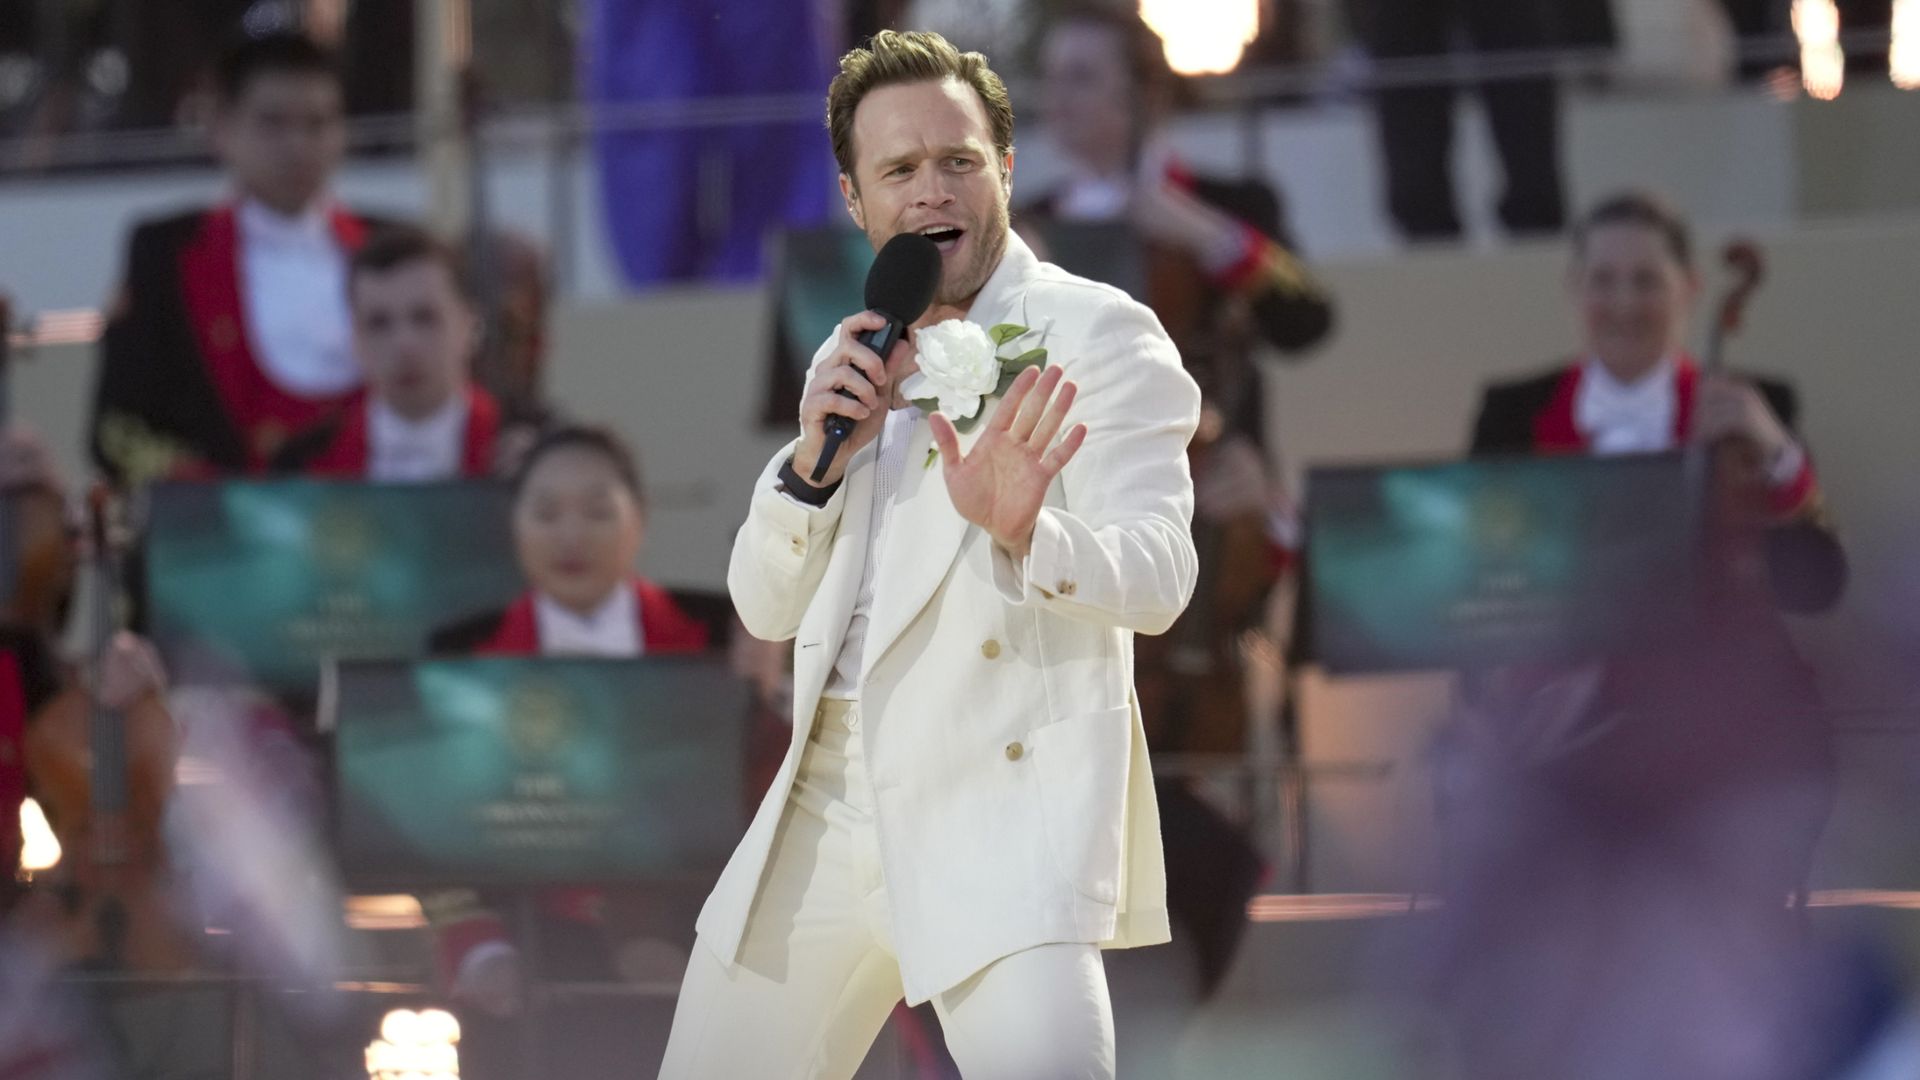 Flight nightmare forces Olly Murs to cancel gig with Take That...